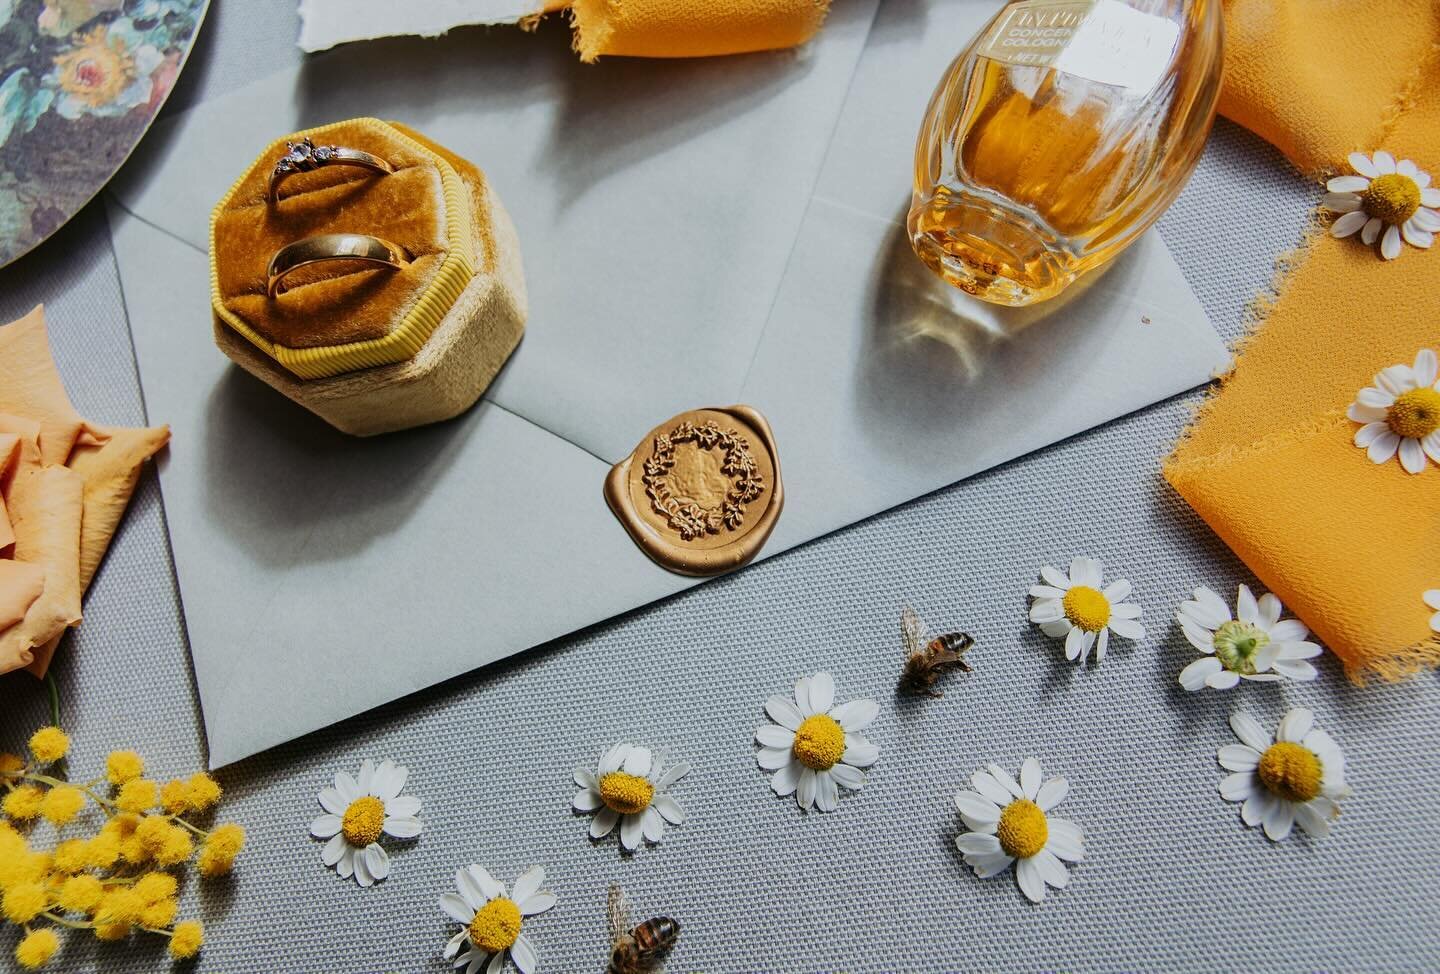 The DETAILS of this shoot 🐝 🍯 

Sometimes I feel as though details can get overlooked, which is why I will always give myself enough time to truly capture them. Every small little detail come together to make your dream wedding a reality.

#kansasc